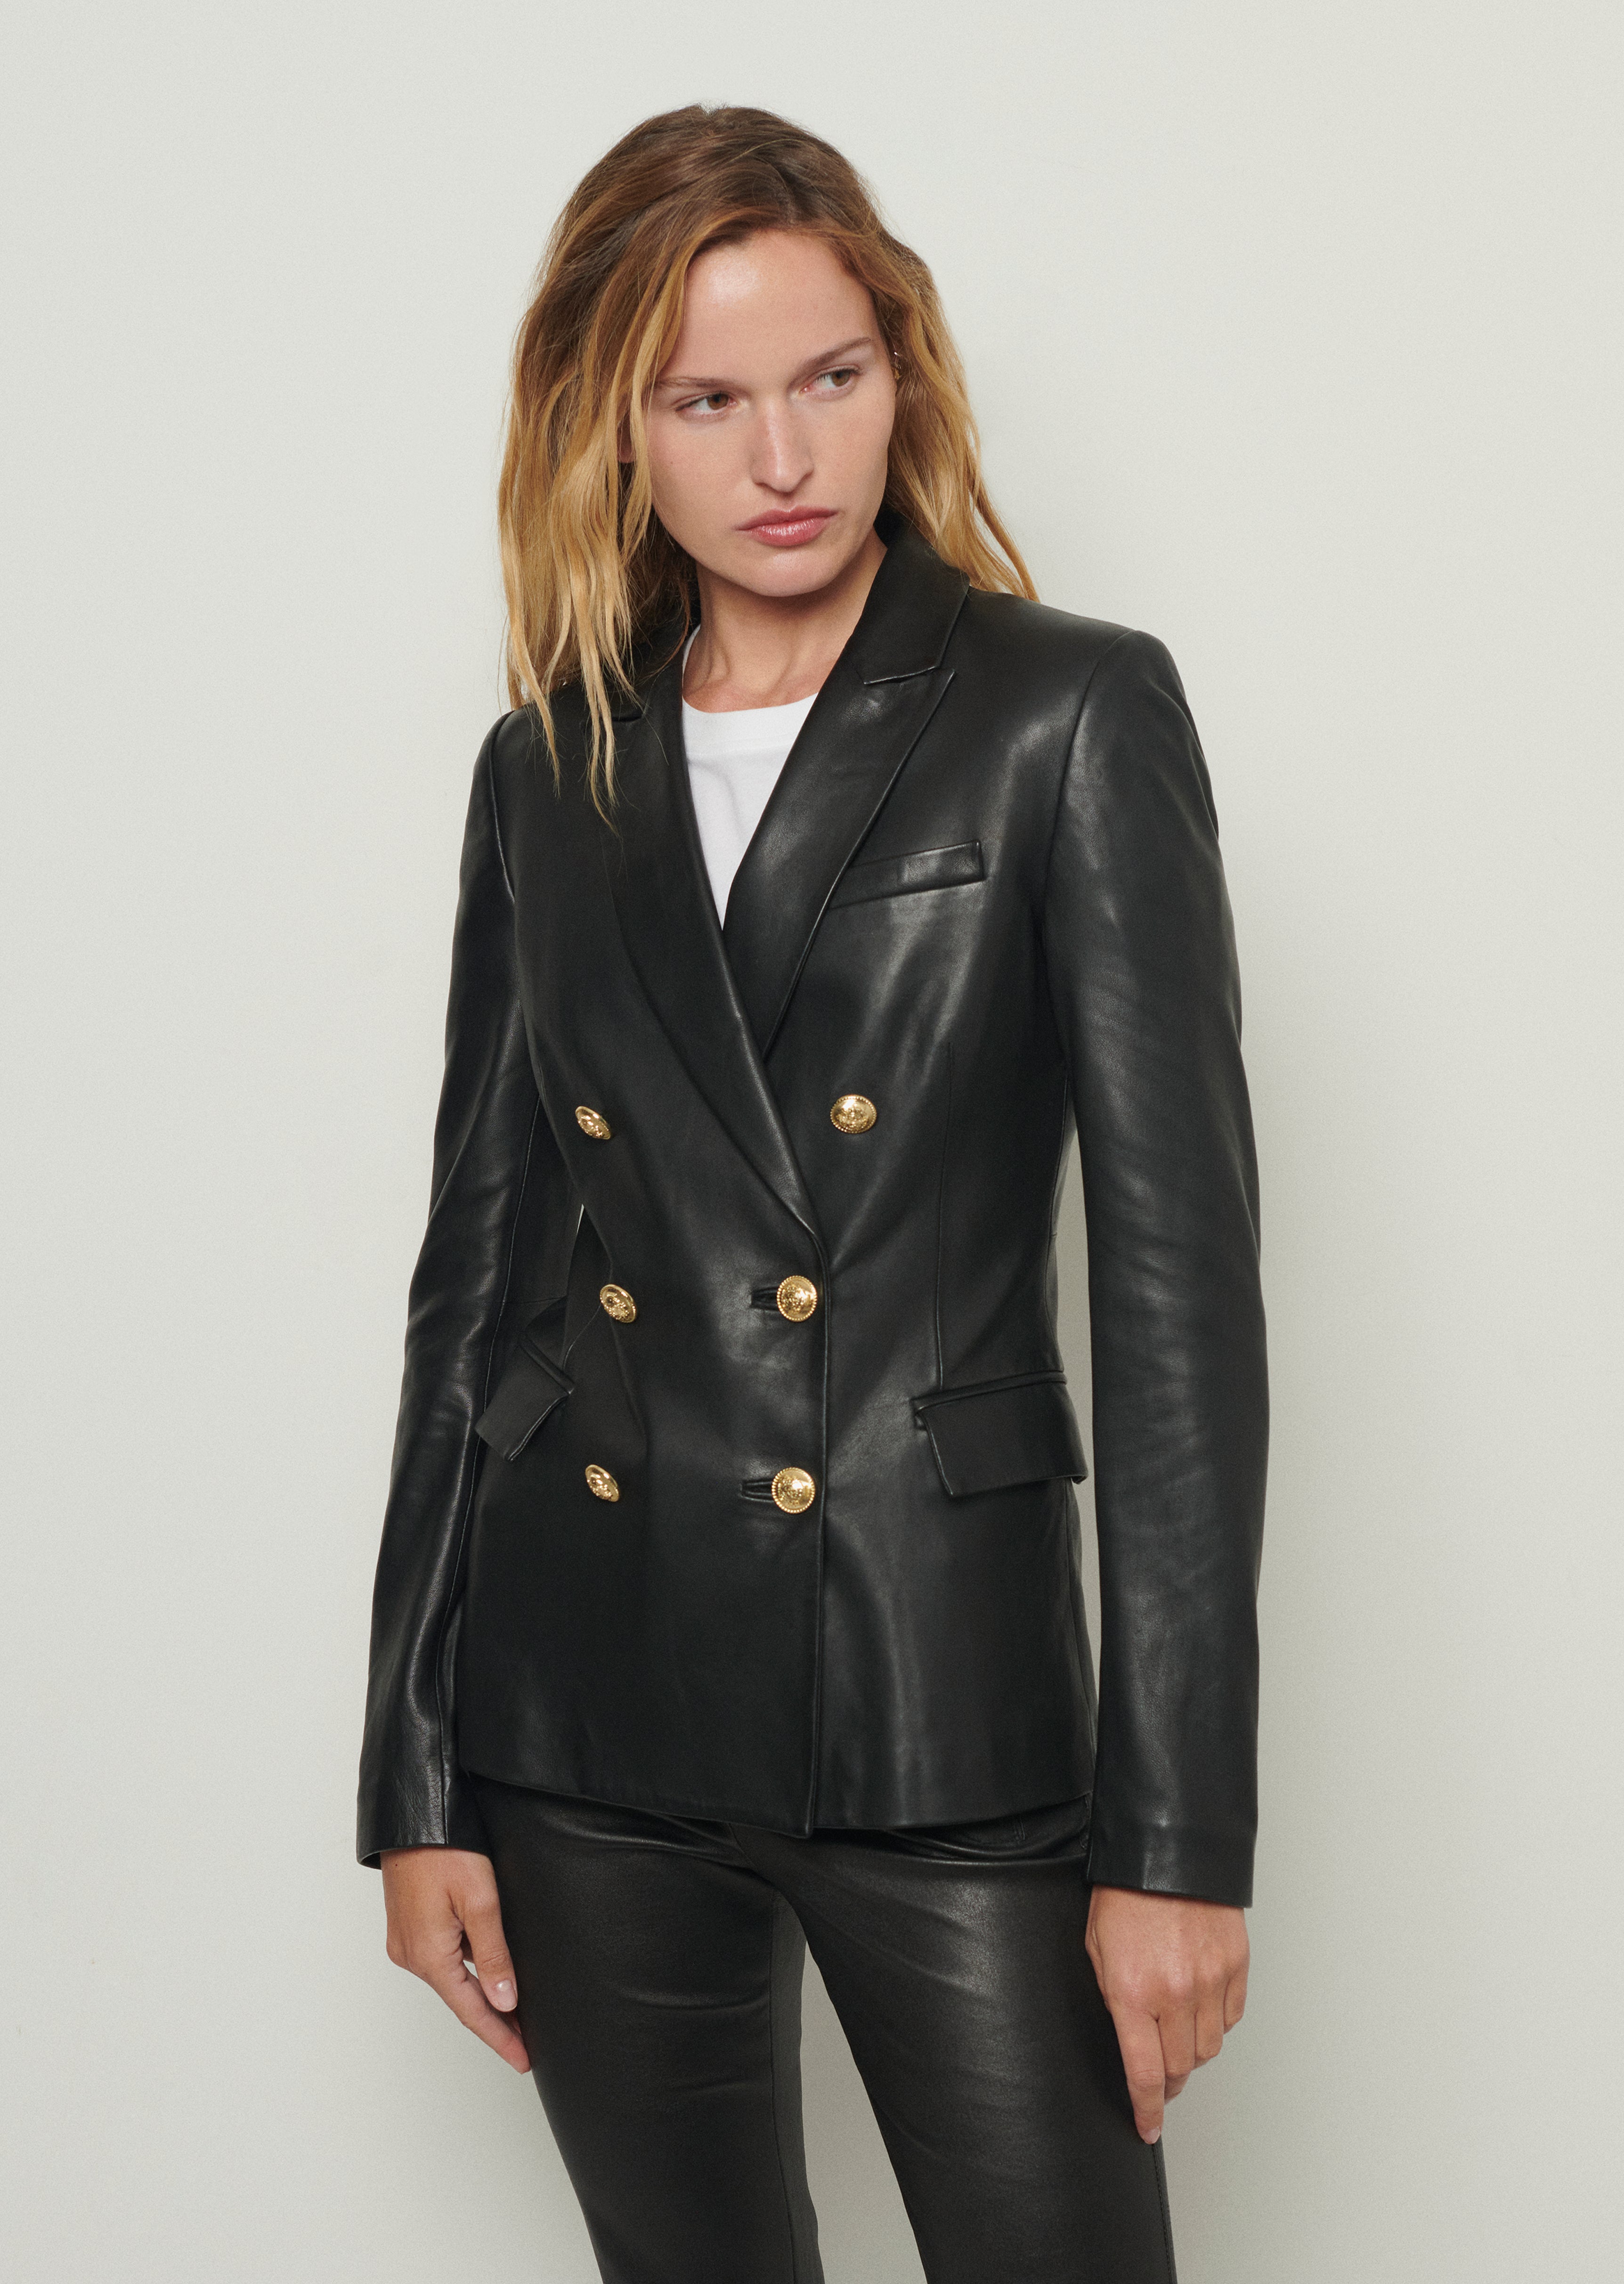 Faux Leather Trench Coat by Derek Lam Collective for $69